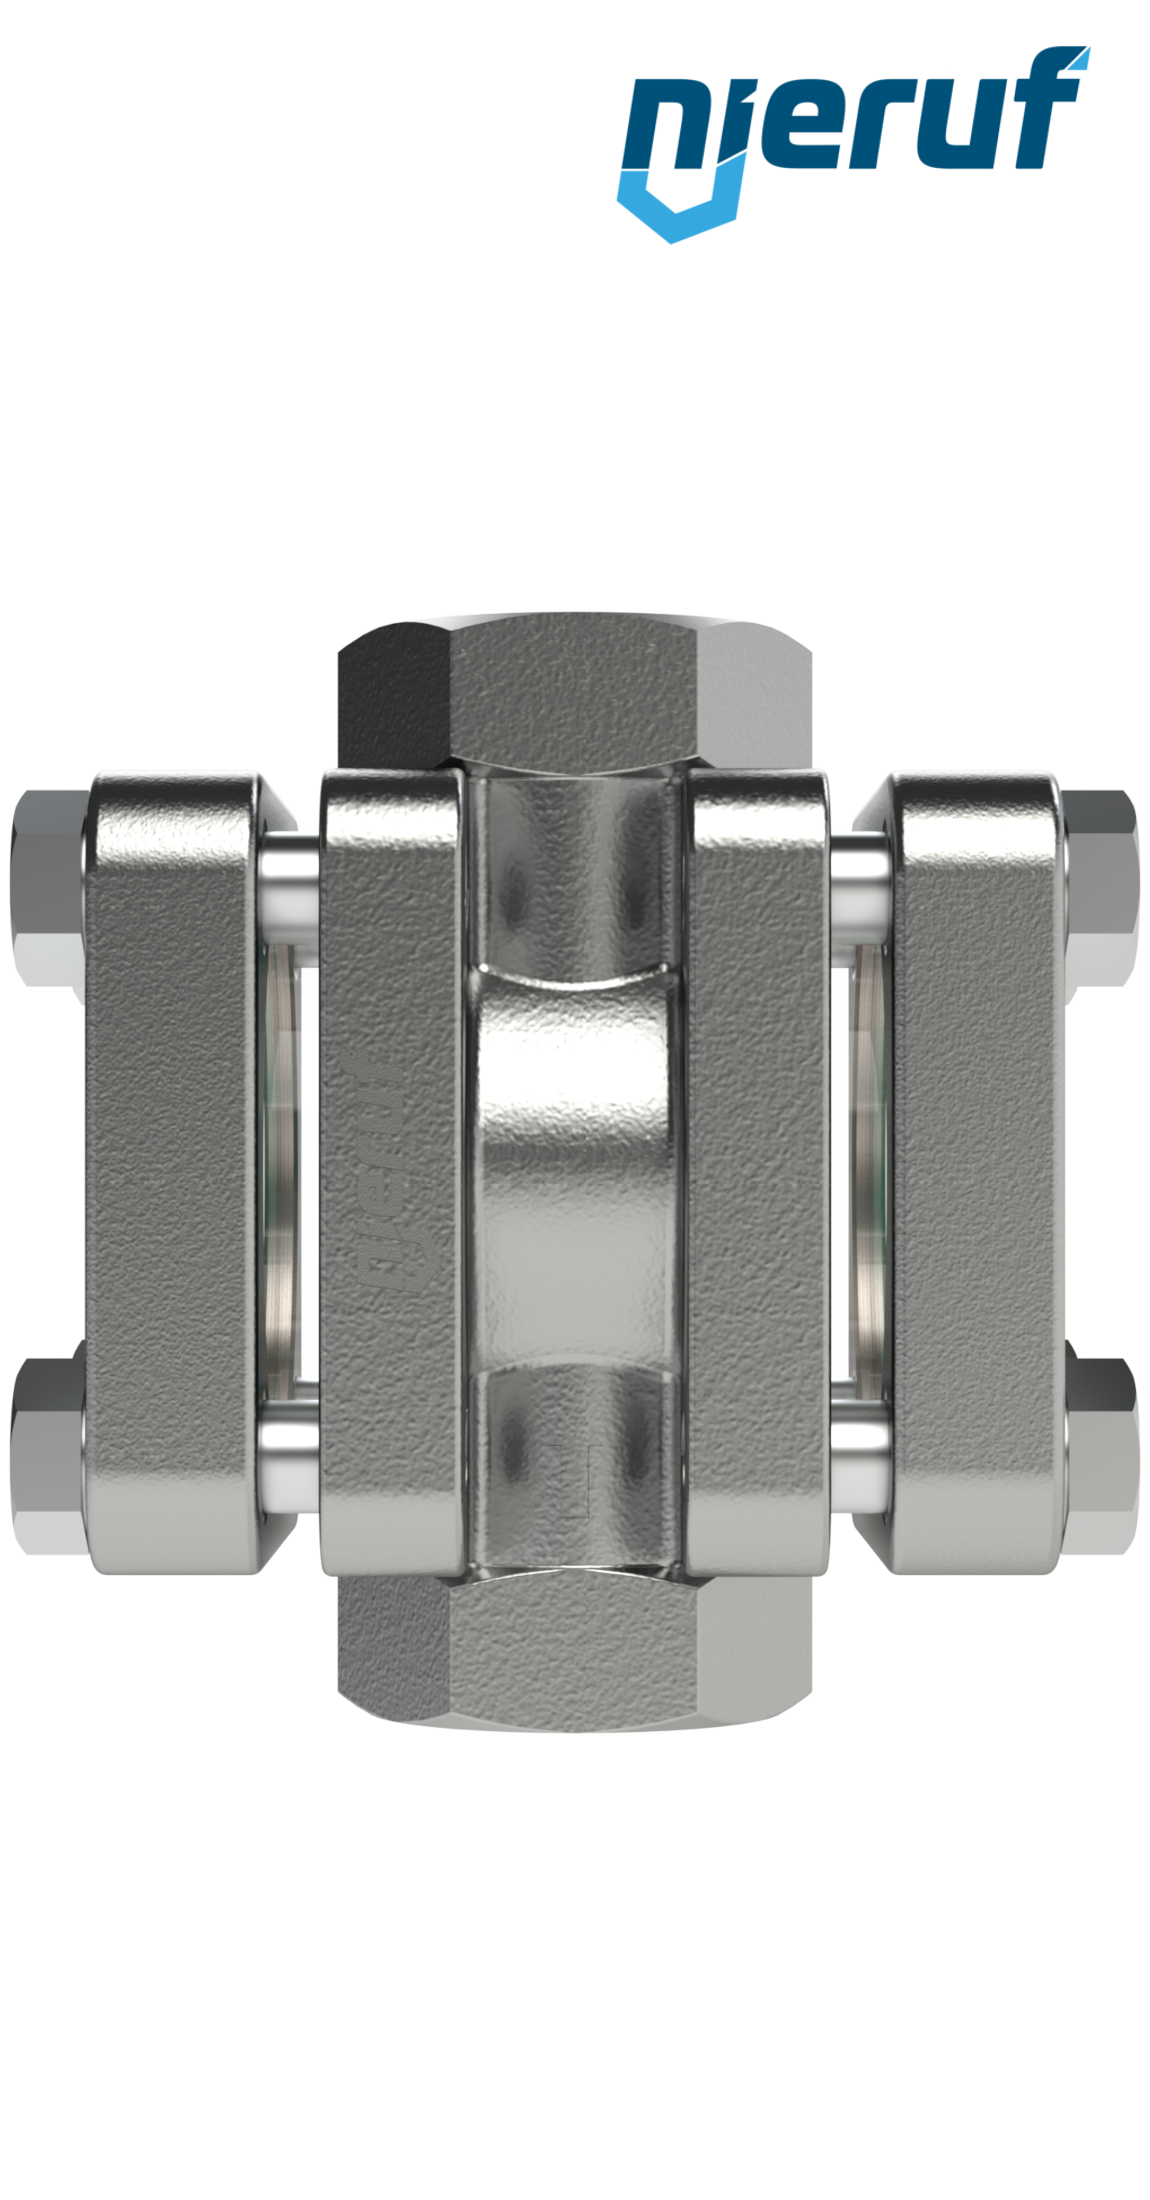 flow-through sight flow indicator DN15 - 1/2" Inch stainless steel borosilicate glass